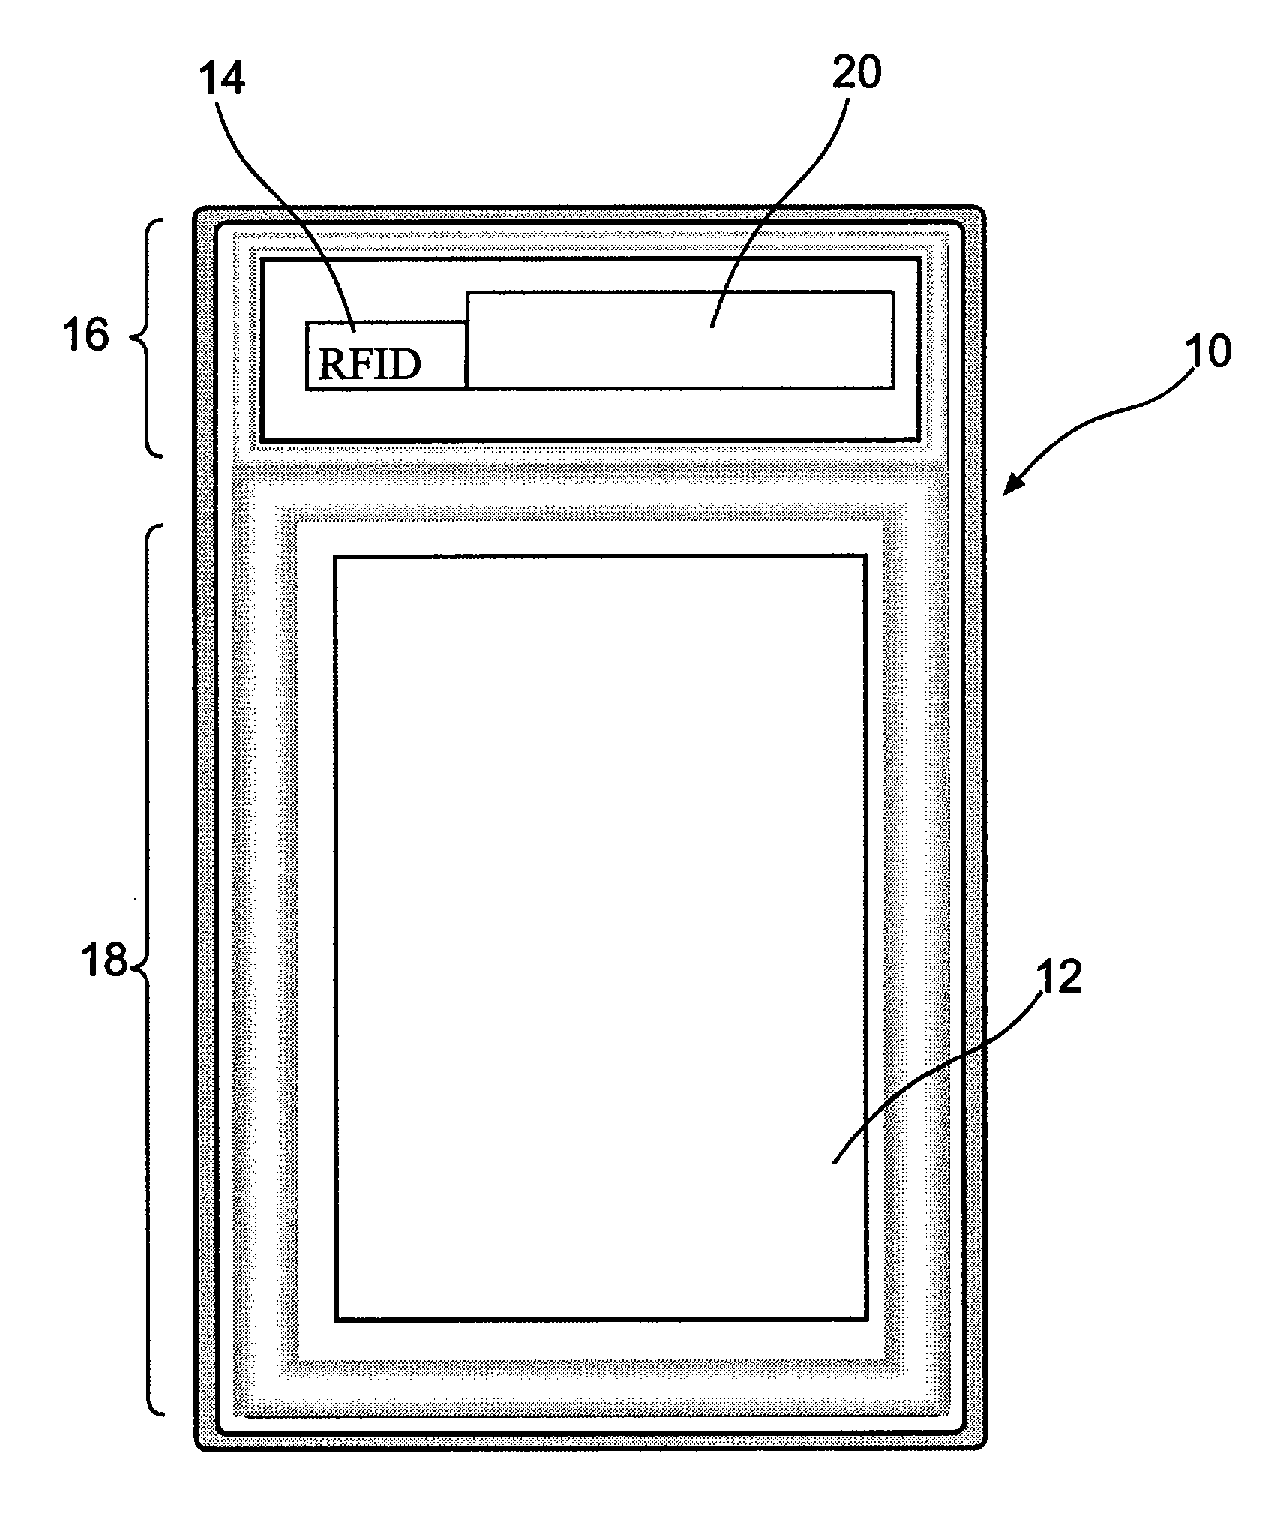 Method, apparatus, and system for tracking unique items